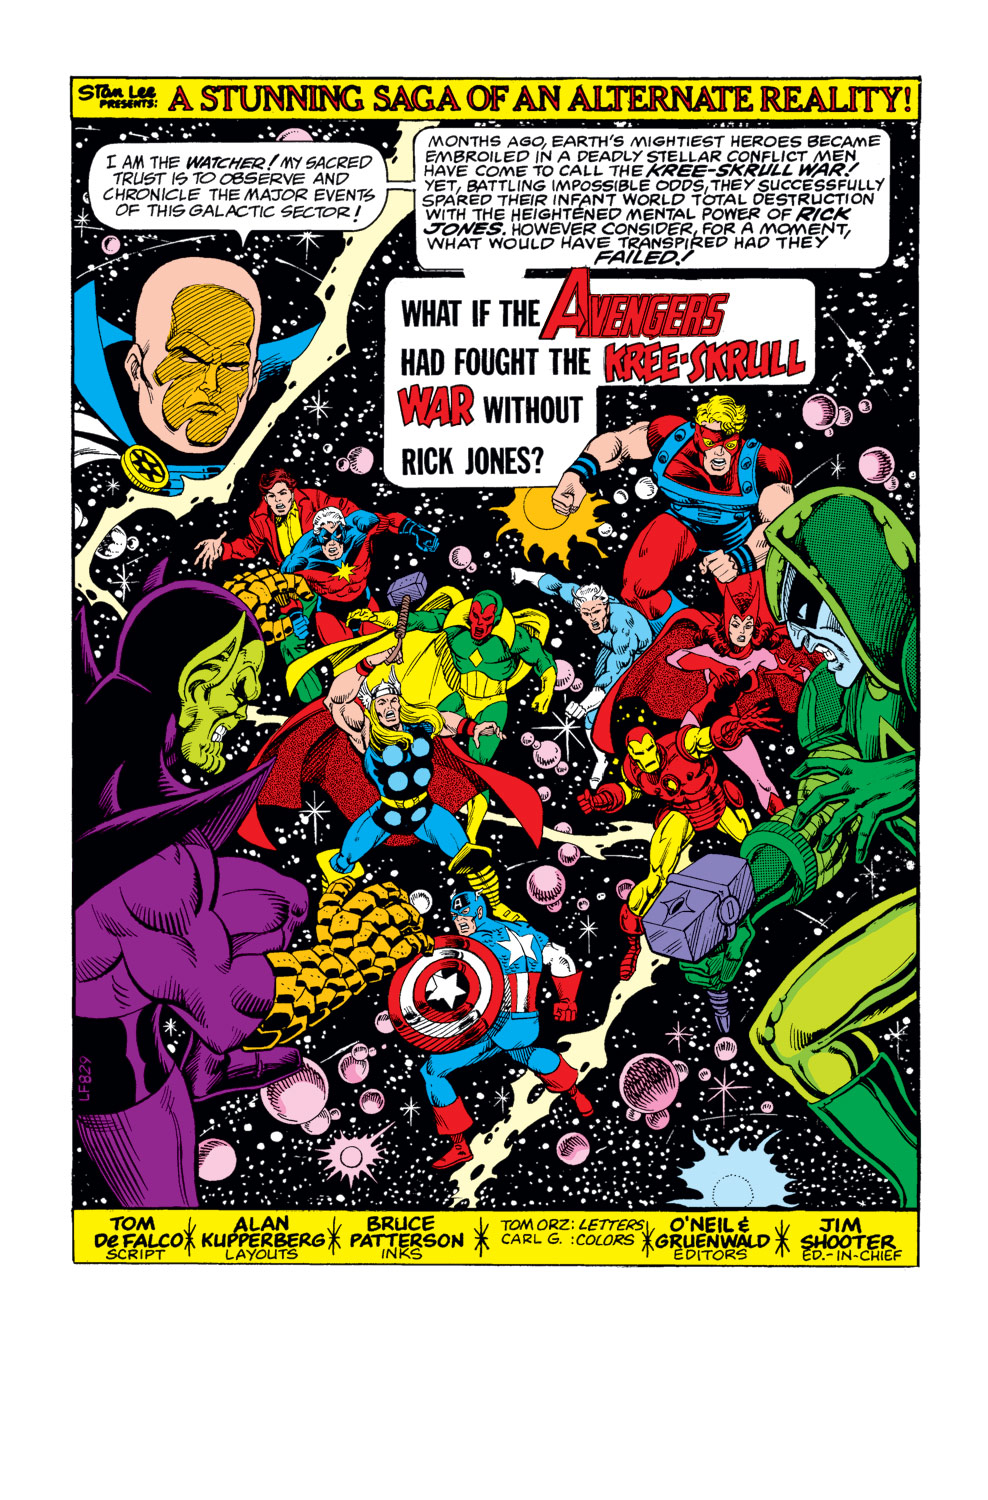 What If? (1977) issue 20 - The Avengers fought the Kree-Skrull war without Rick Jones - Page 2